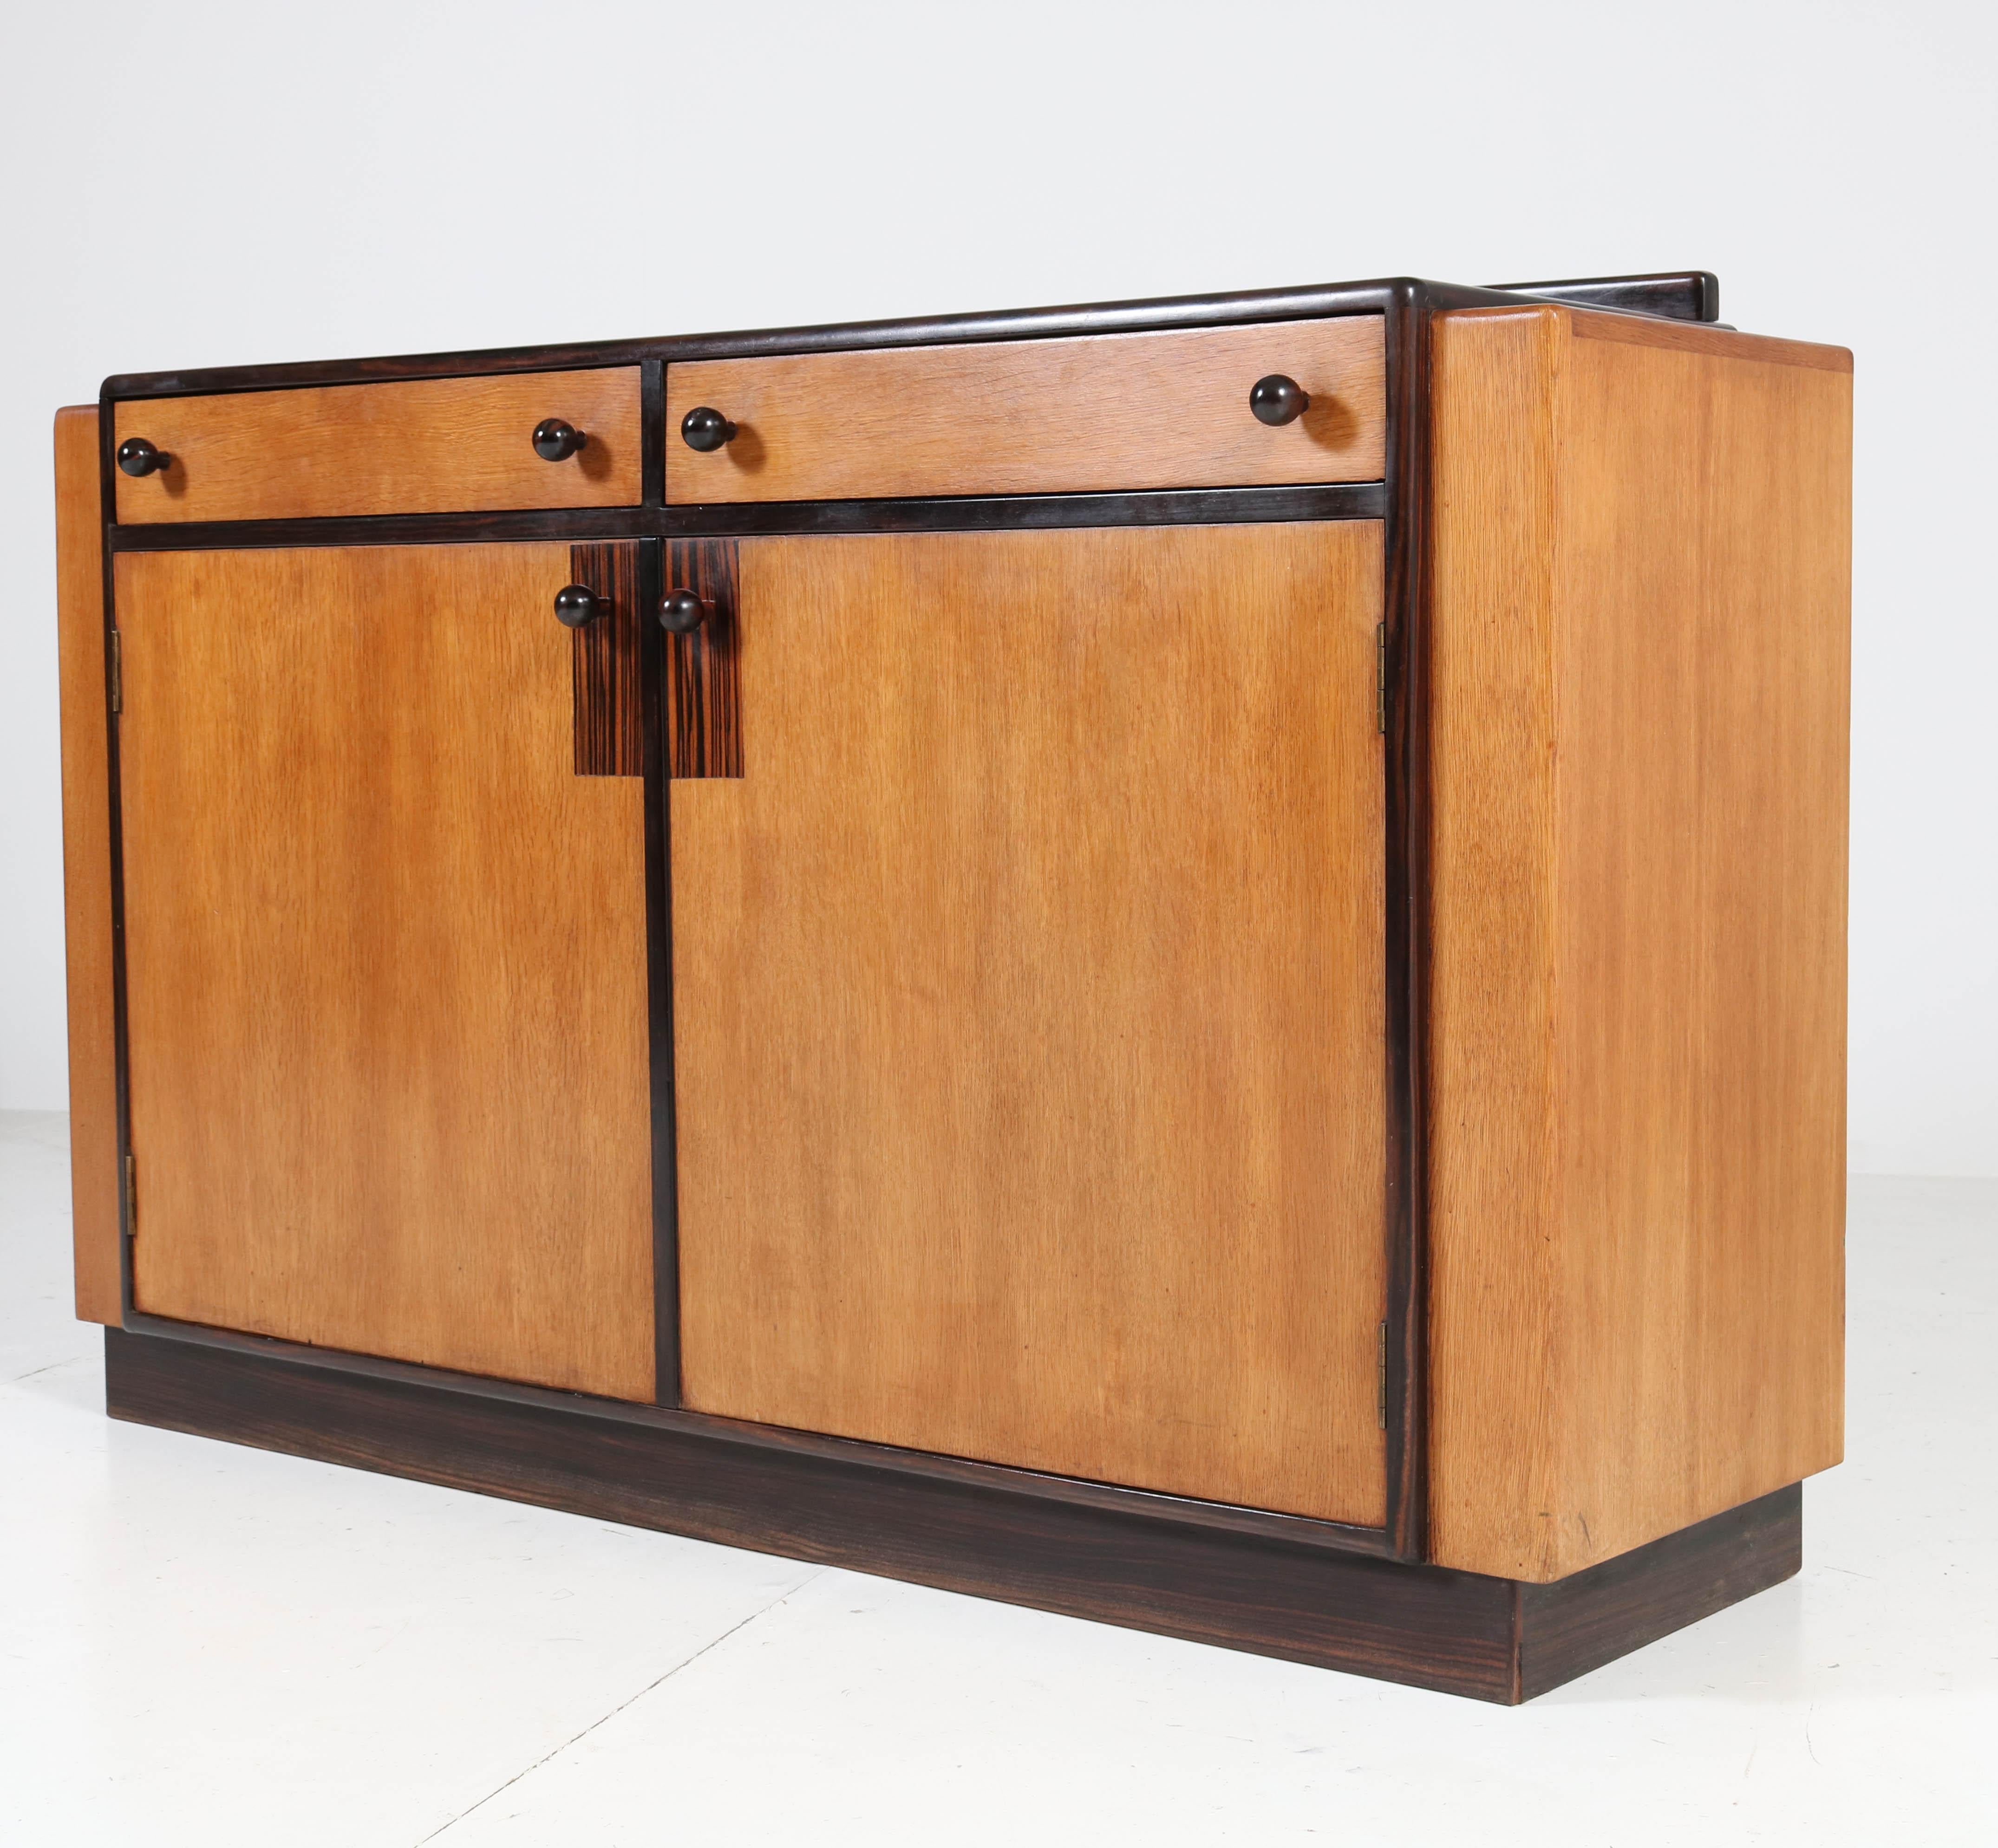 Wonderful and rare Art Deco Haagse School credenza or sideboard.
Design by P.E.L. Izeren for Genneper Molen.
Striking Dutch design from the twenties.
Oak with solid ebony Macassar lining.
In very good original condition with minor wear